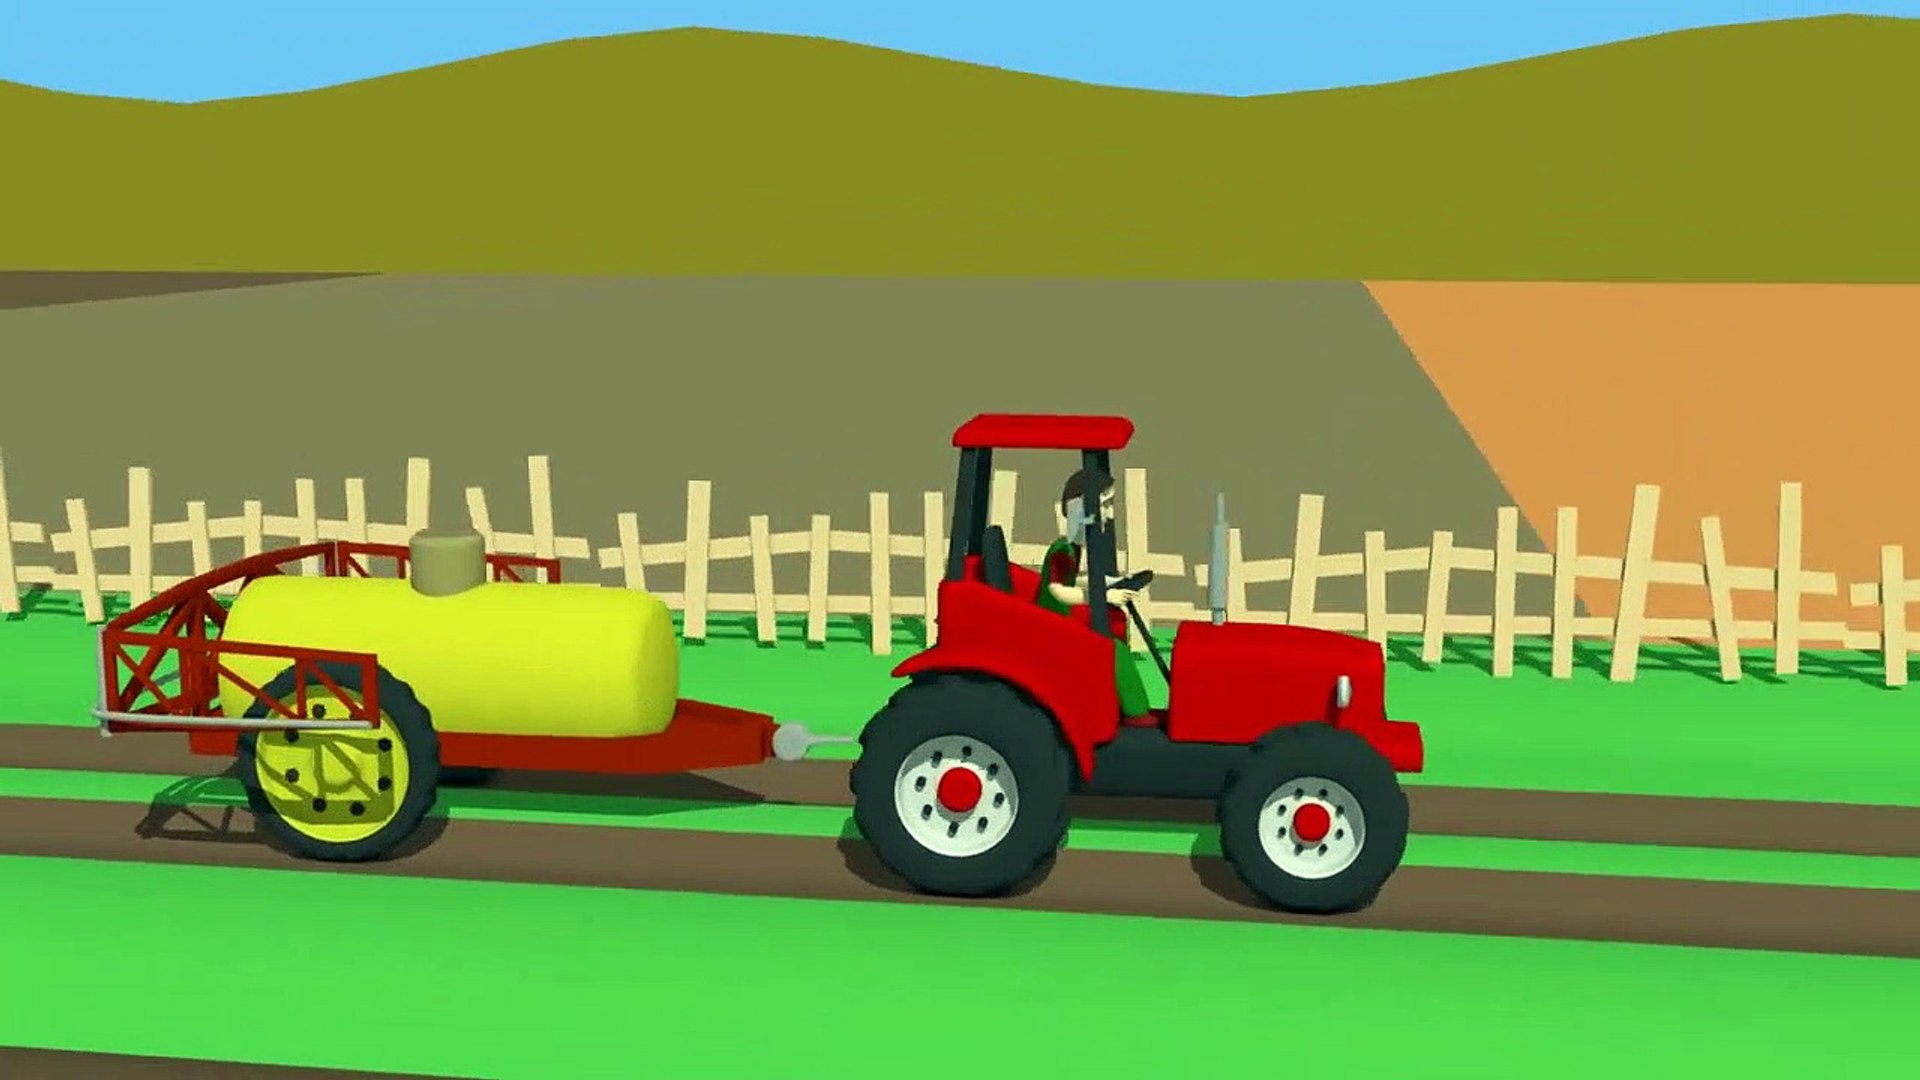 Farm work story - The tractor is spraying the field | Cartoons Tractor -  work in the Field Spraying - Vidéo Dailymotion